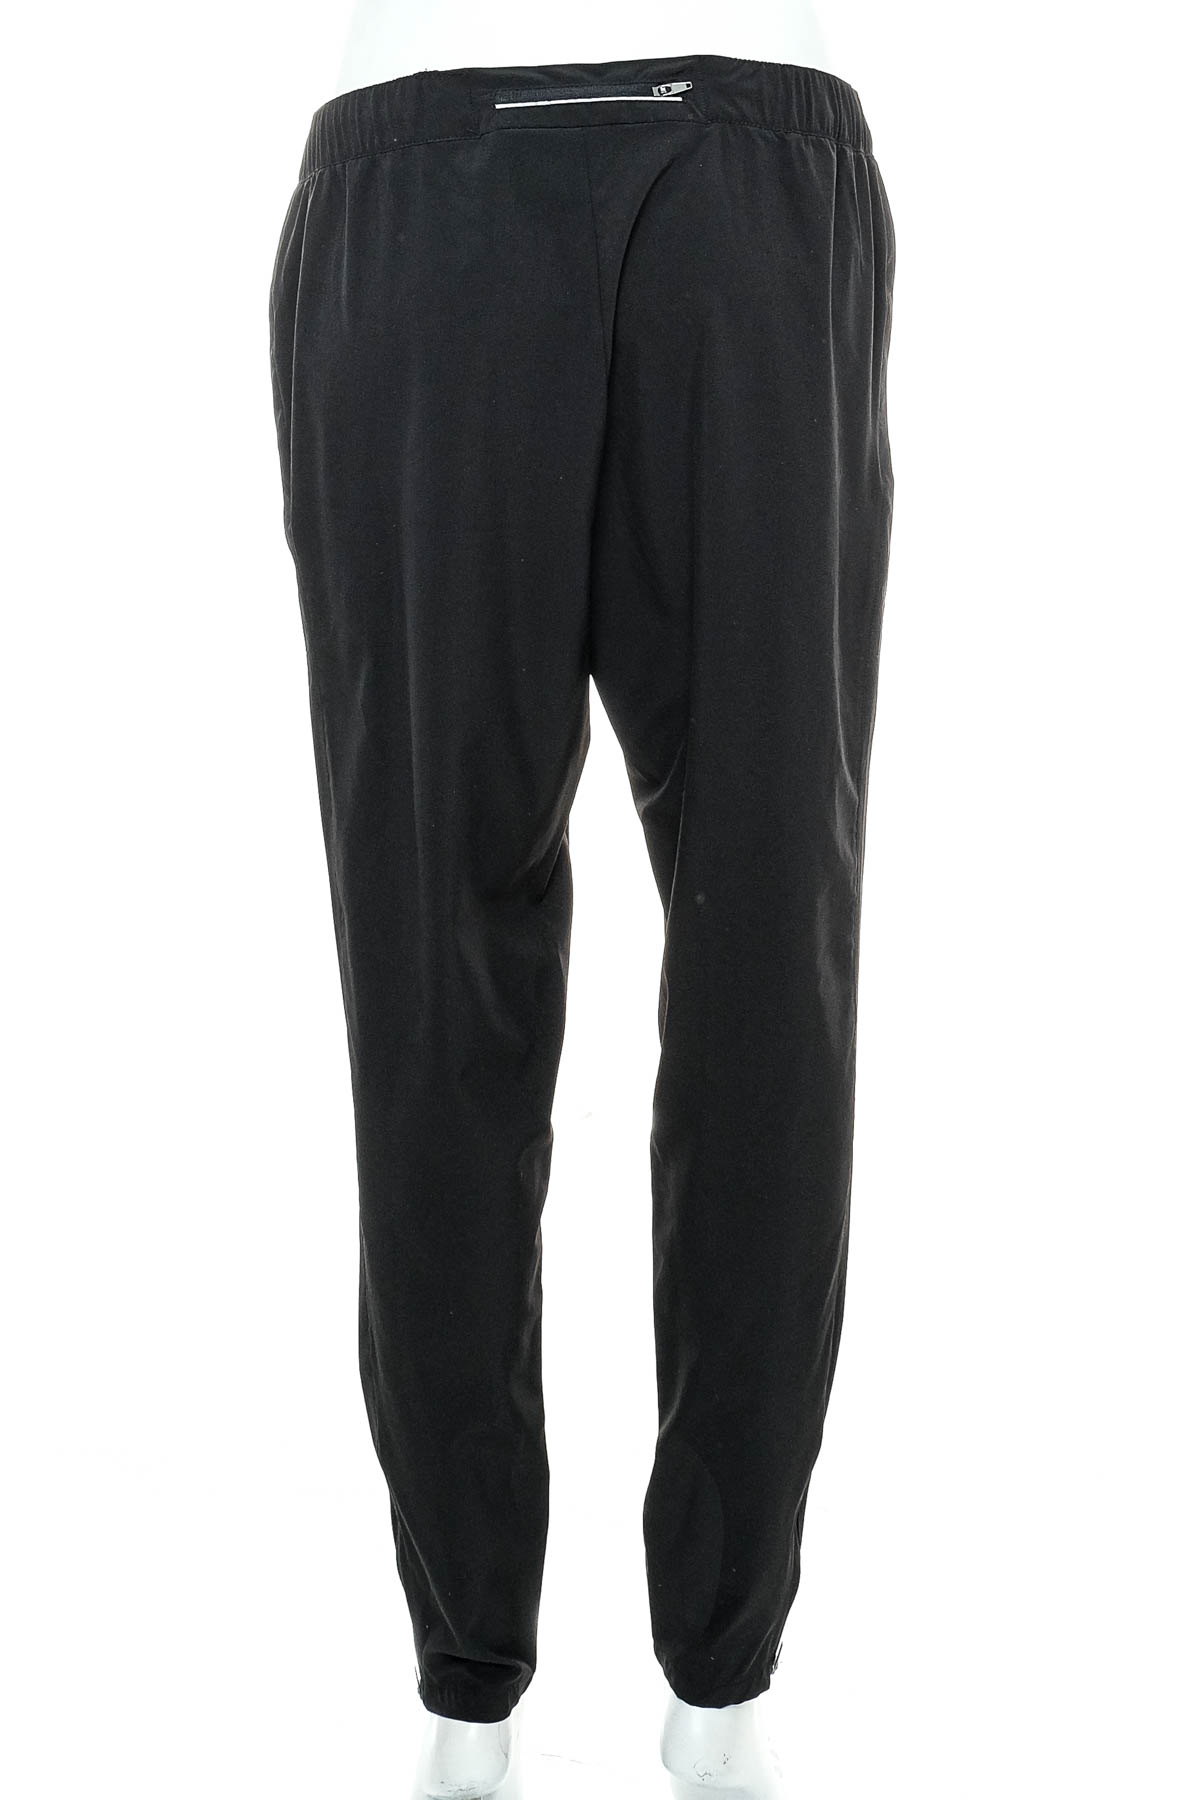 Women's trousers - Active Touch - 1